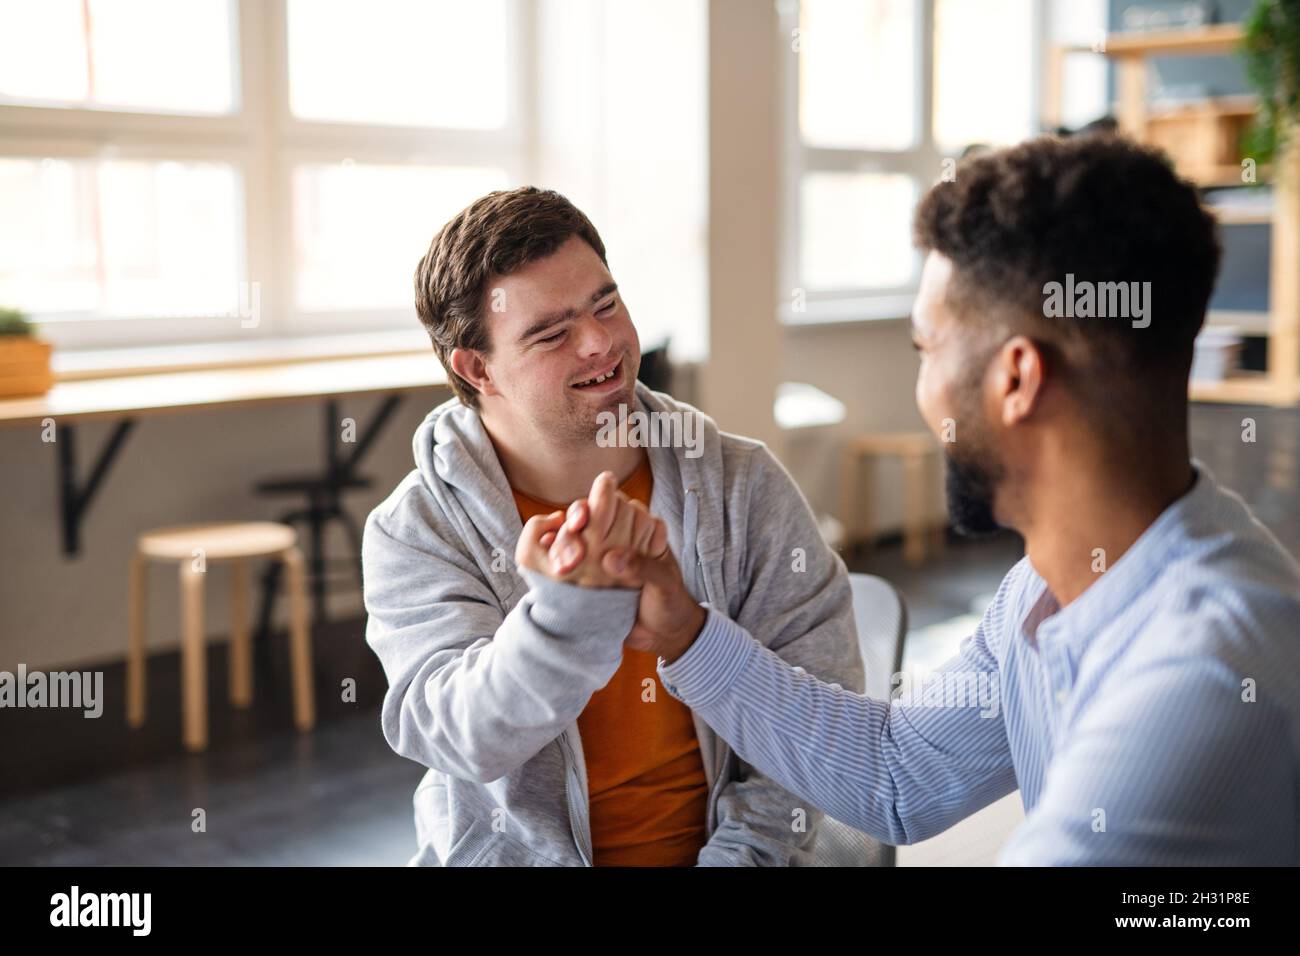 Young happy man with Down syndrome with his mentoring friend celebrating success indoors at school. Stock Photo